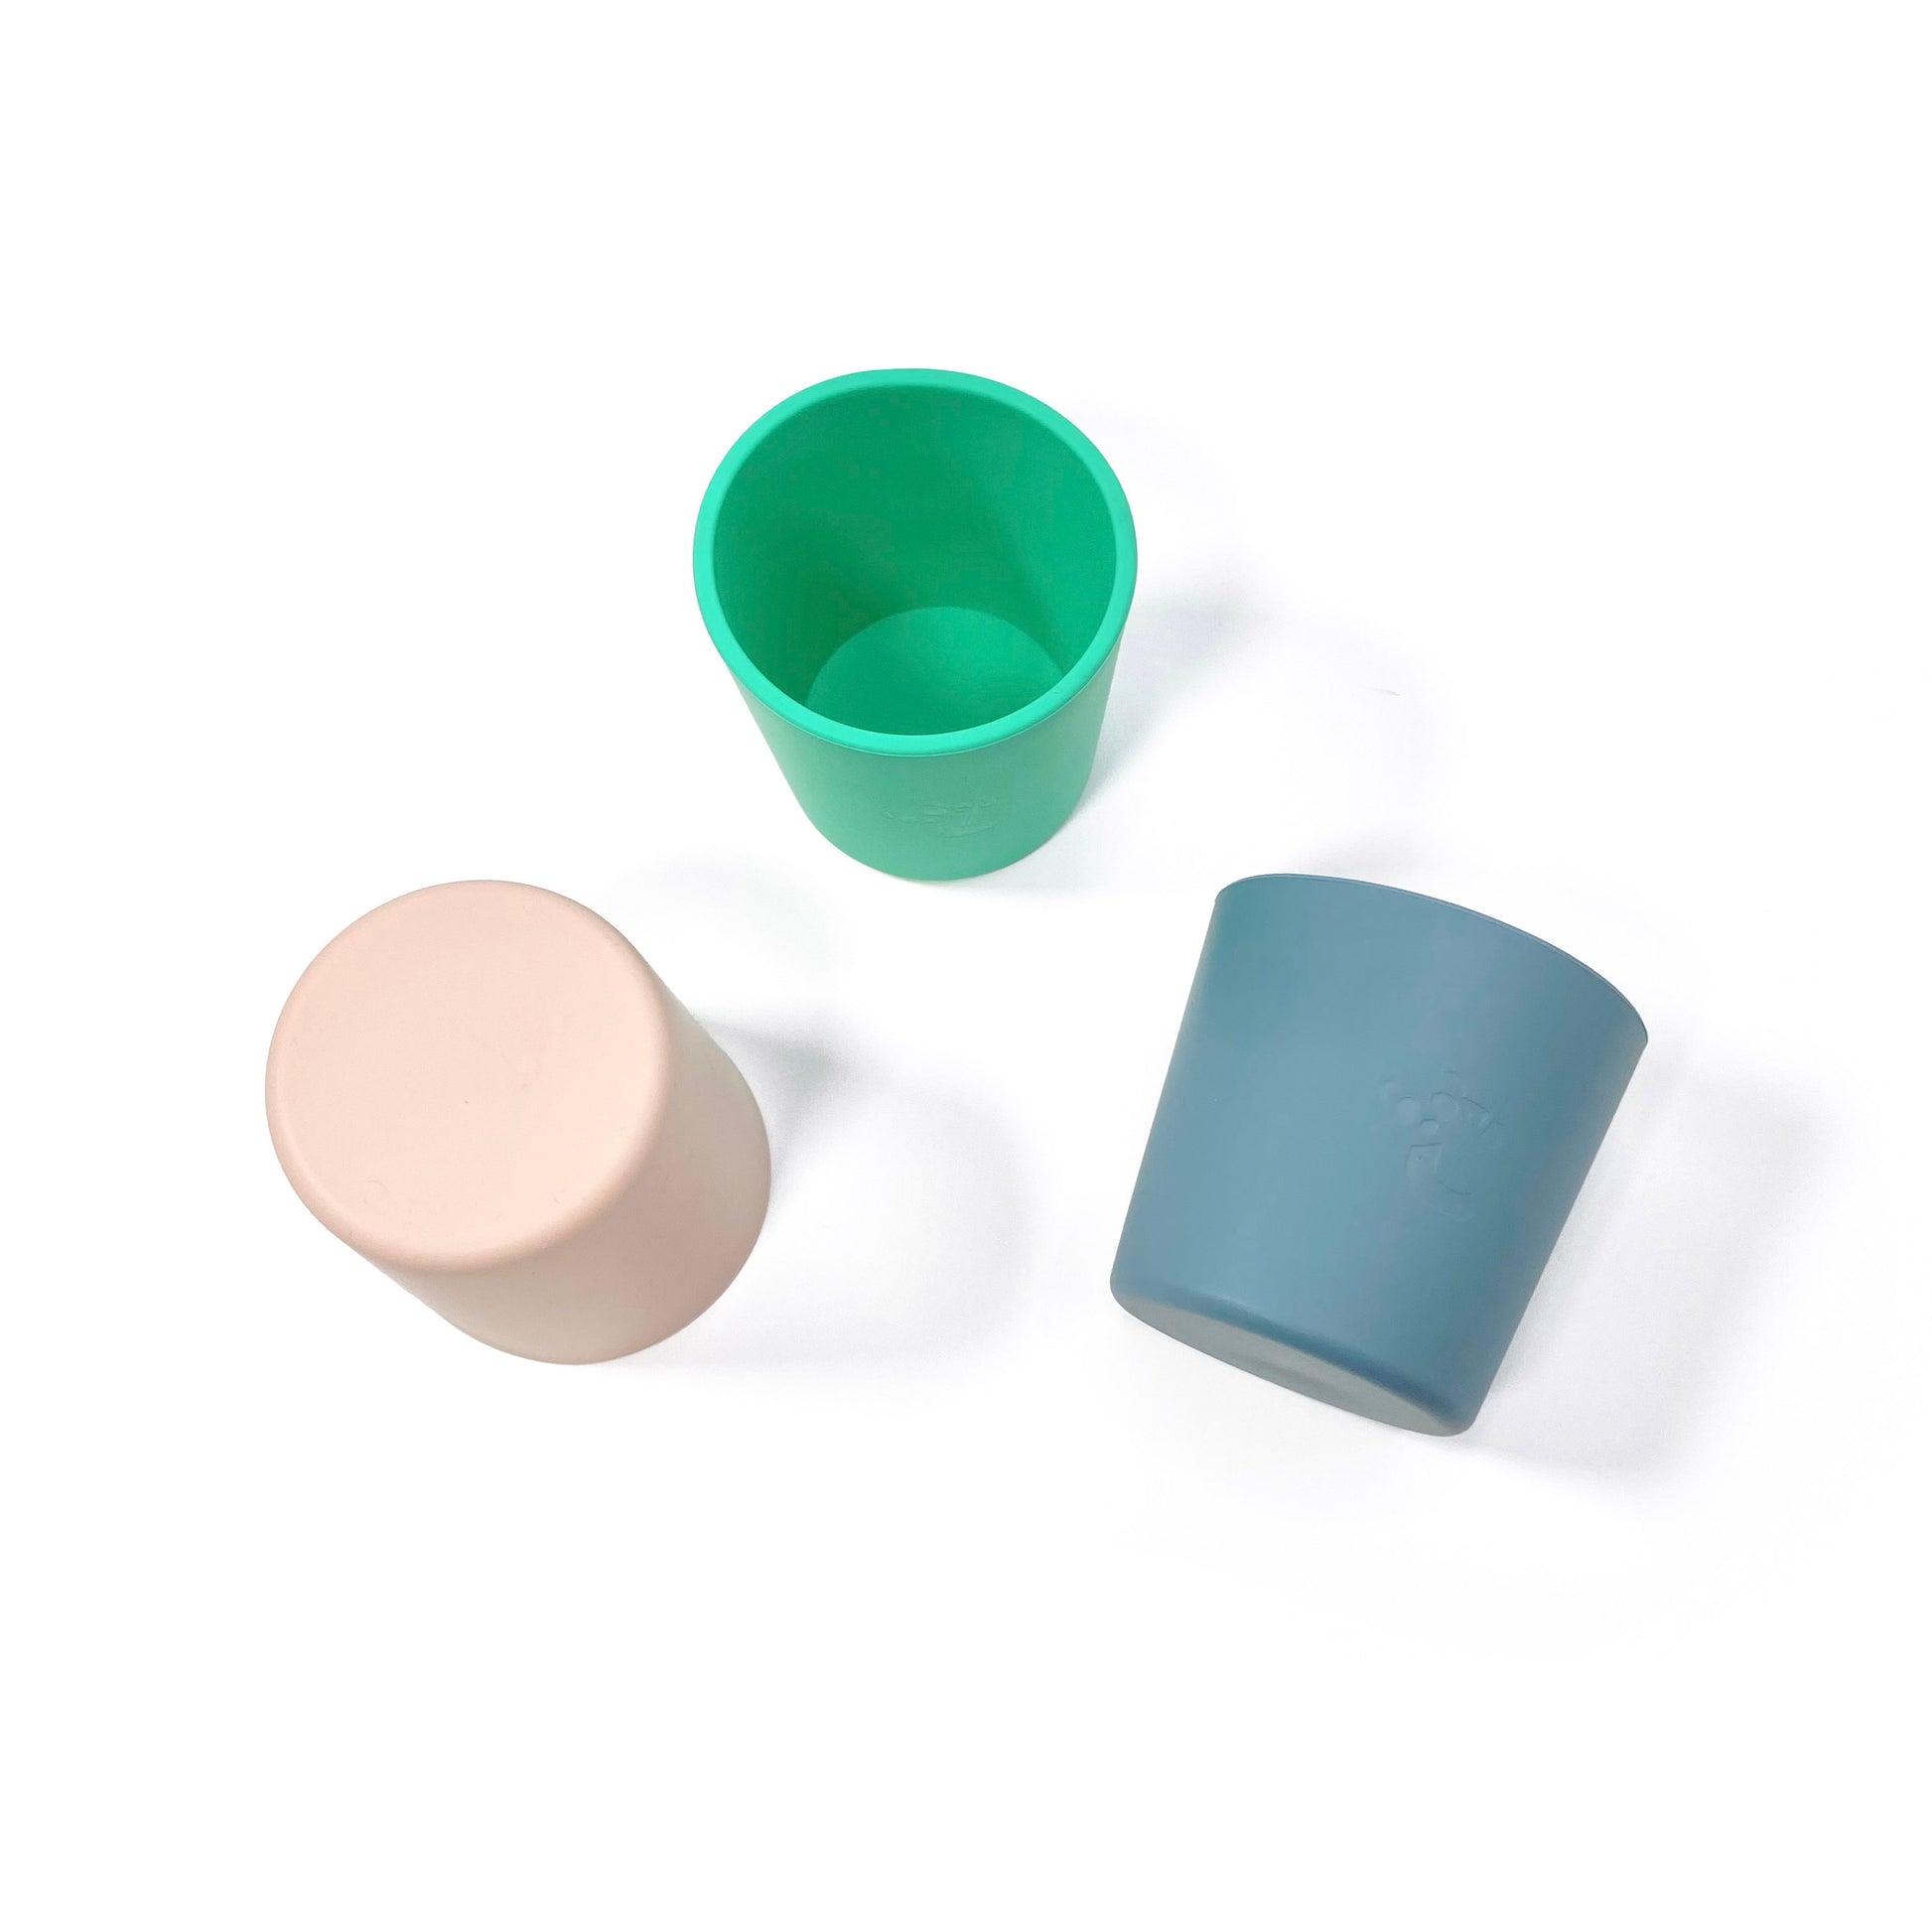 A collection of silicone children’s cups, available in peachy pink, ocean blue and seafoam green. The cups are shown in a scattered formation. View from above.